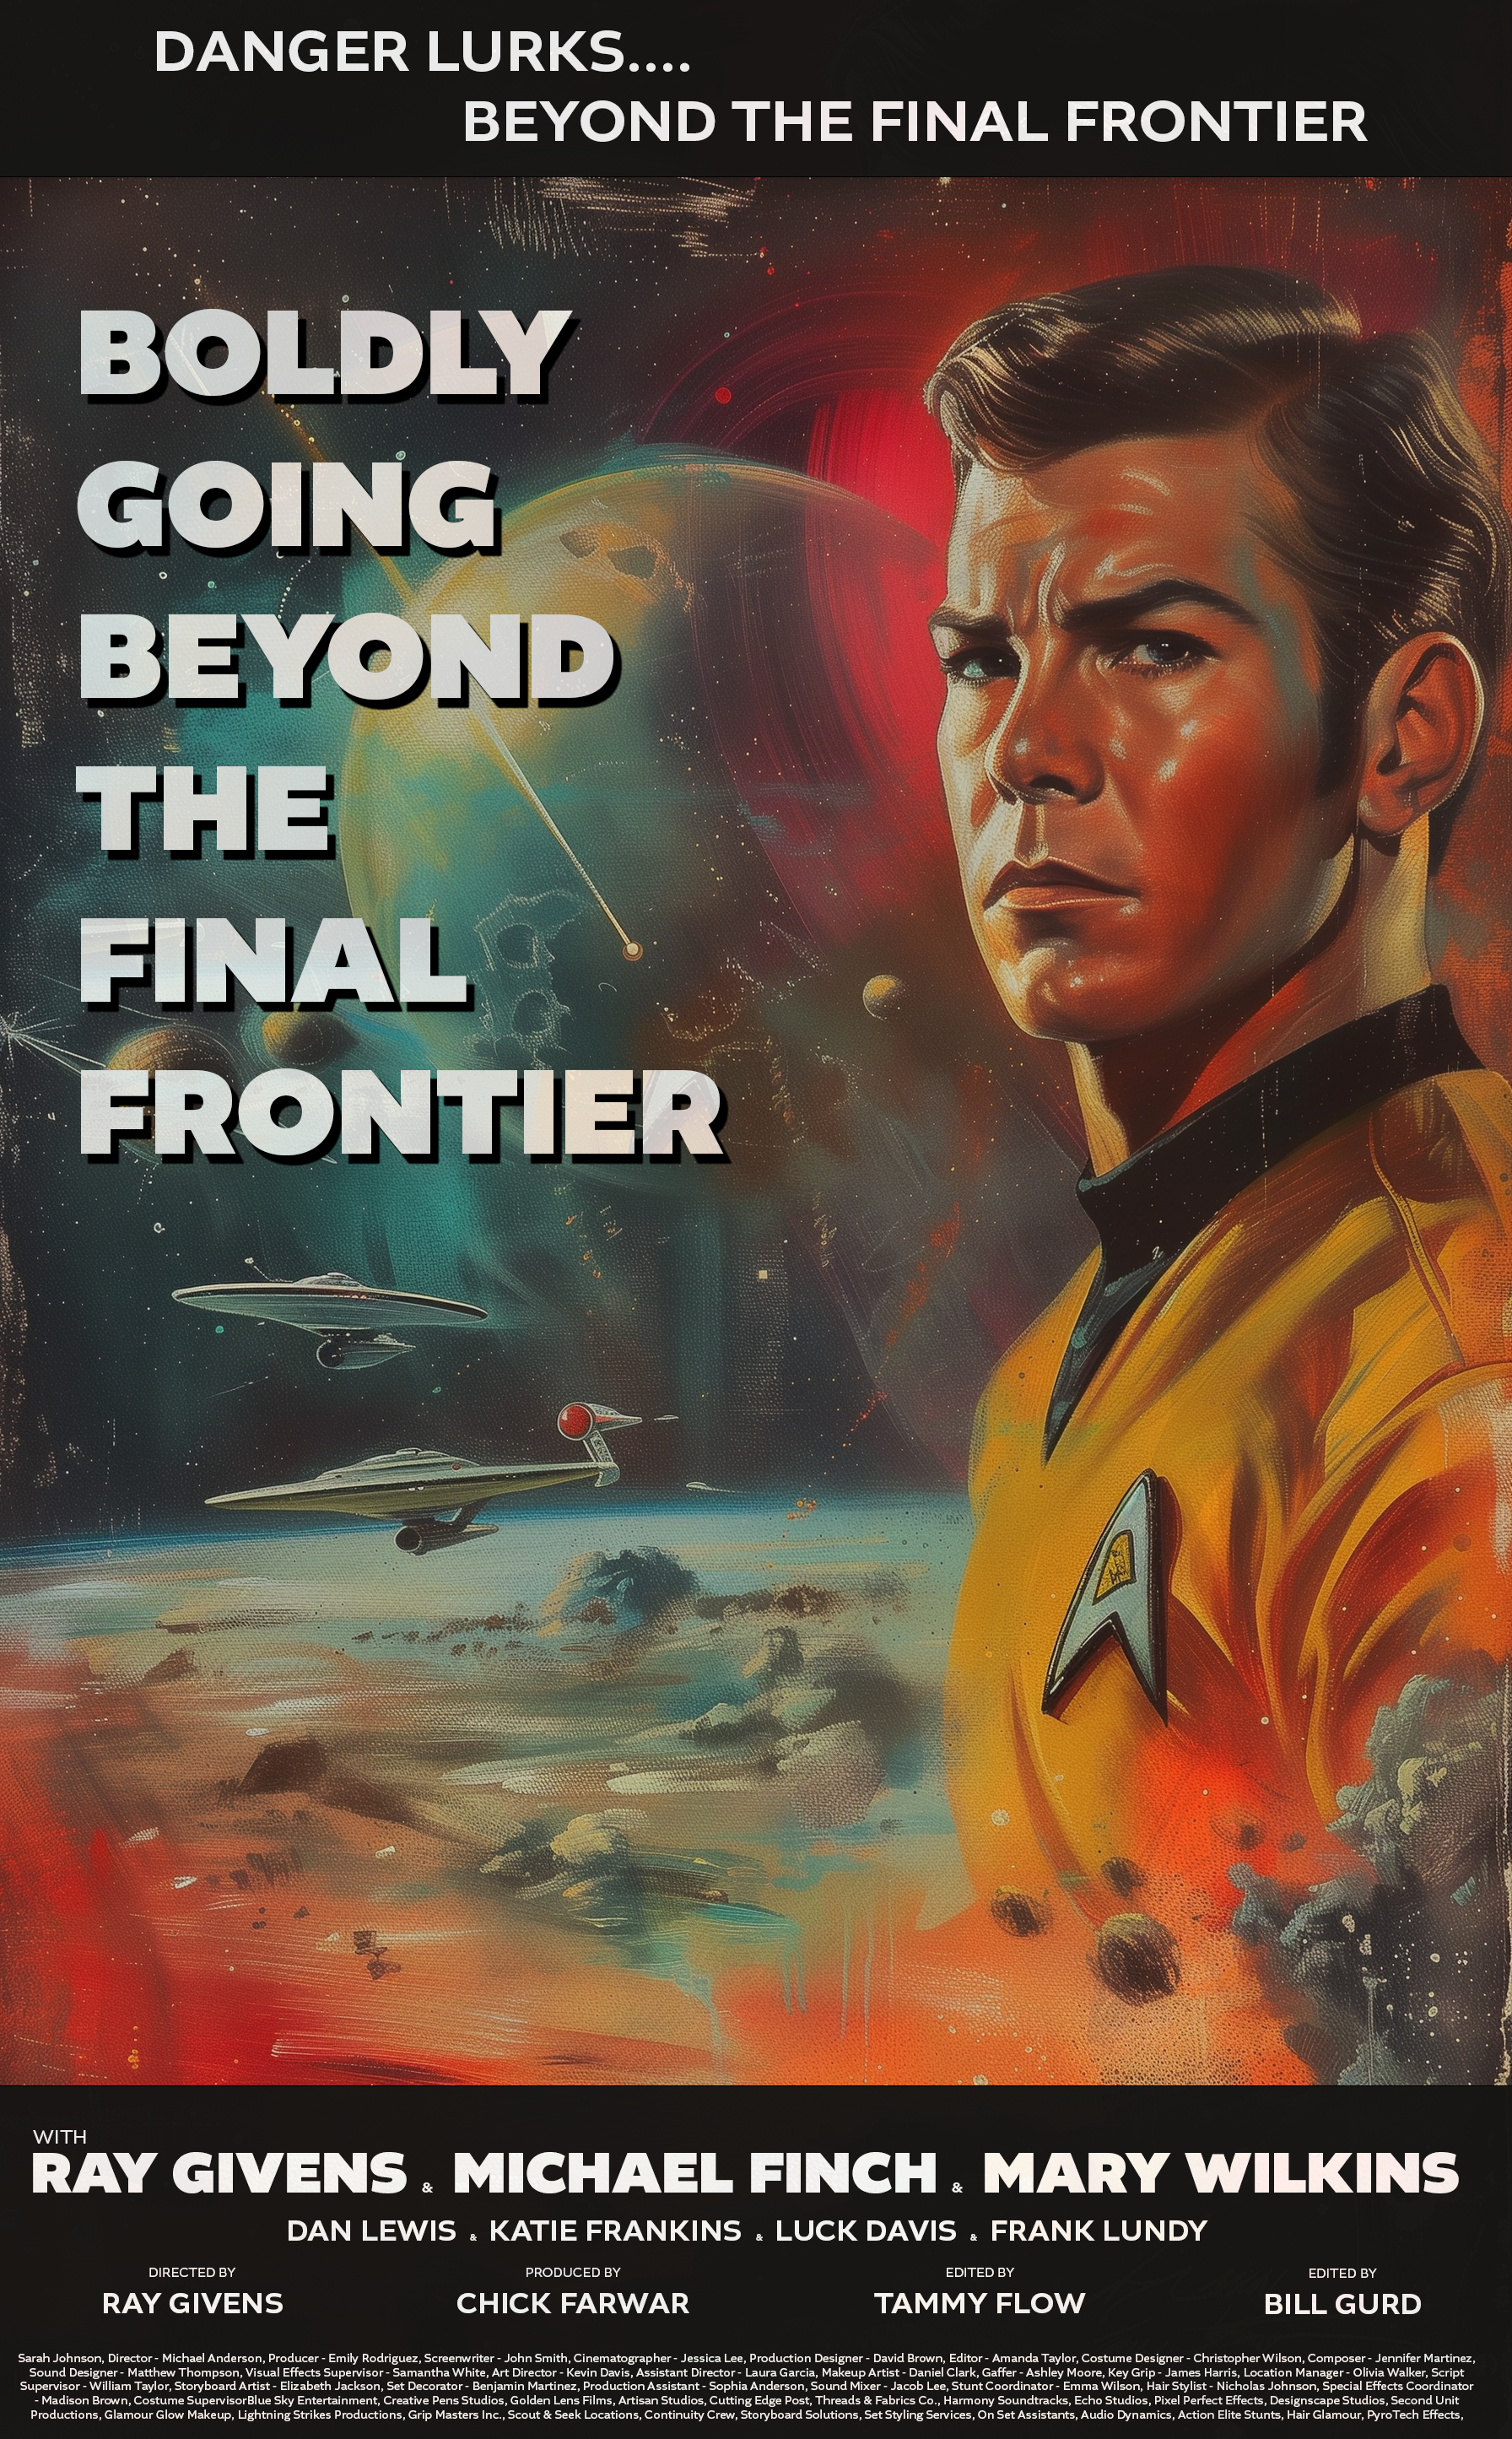 Name:  Beyond the Final Frontier.png
Views: 152
Size:  8.19 MB